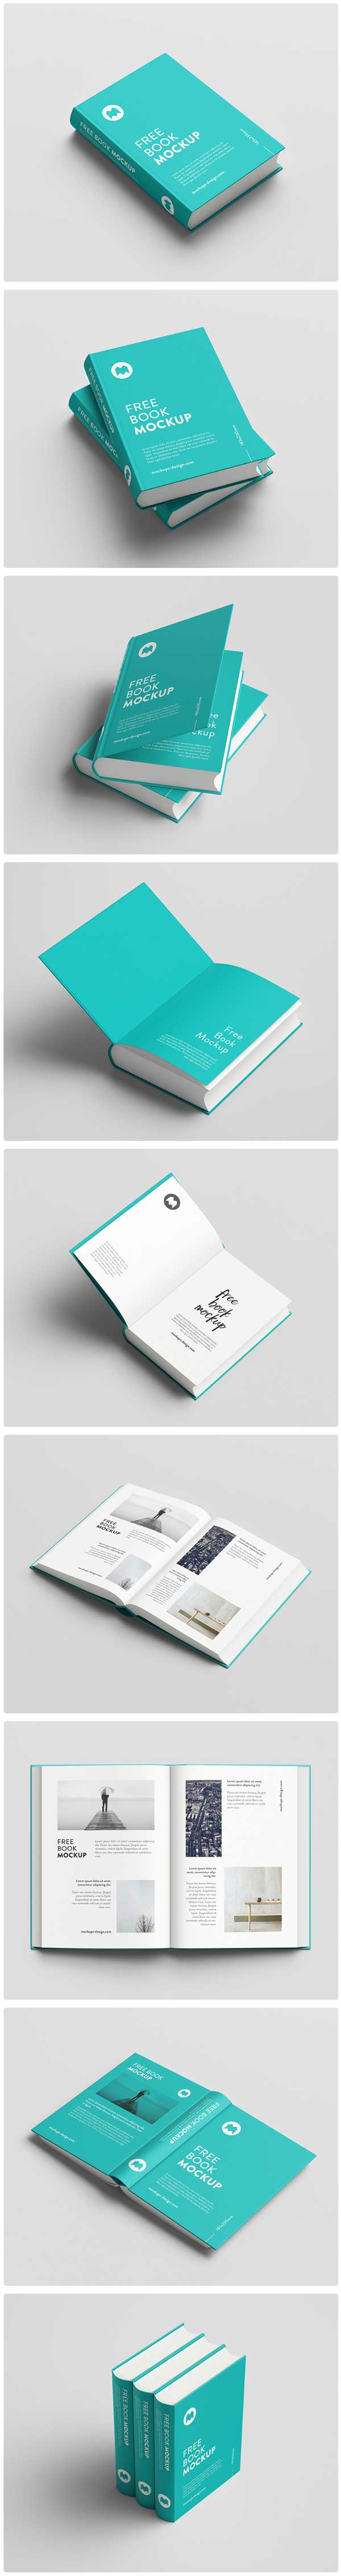 Free Thick Book Mockup Pack